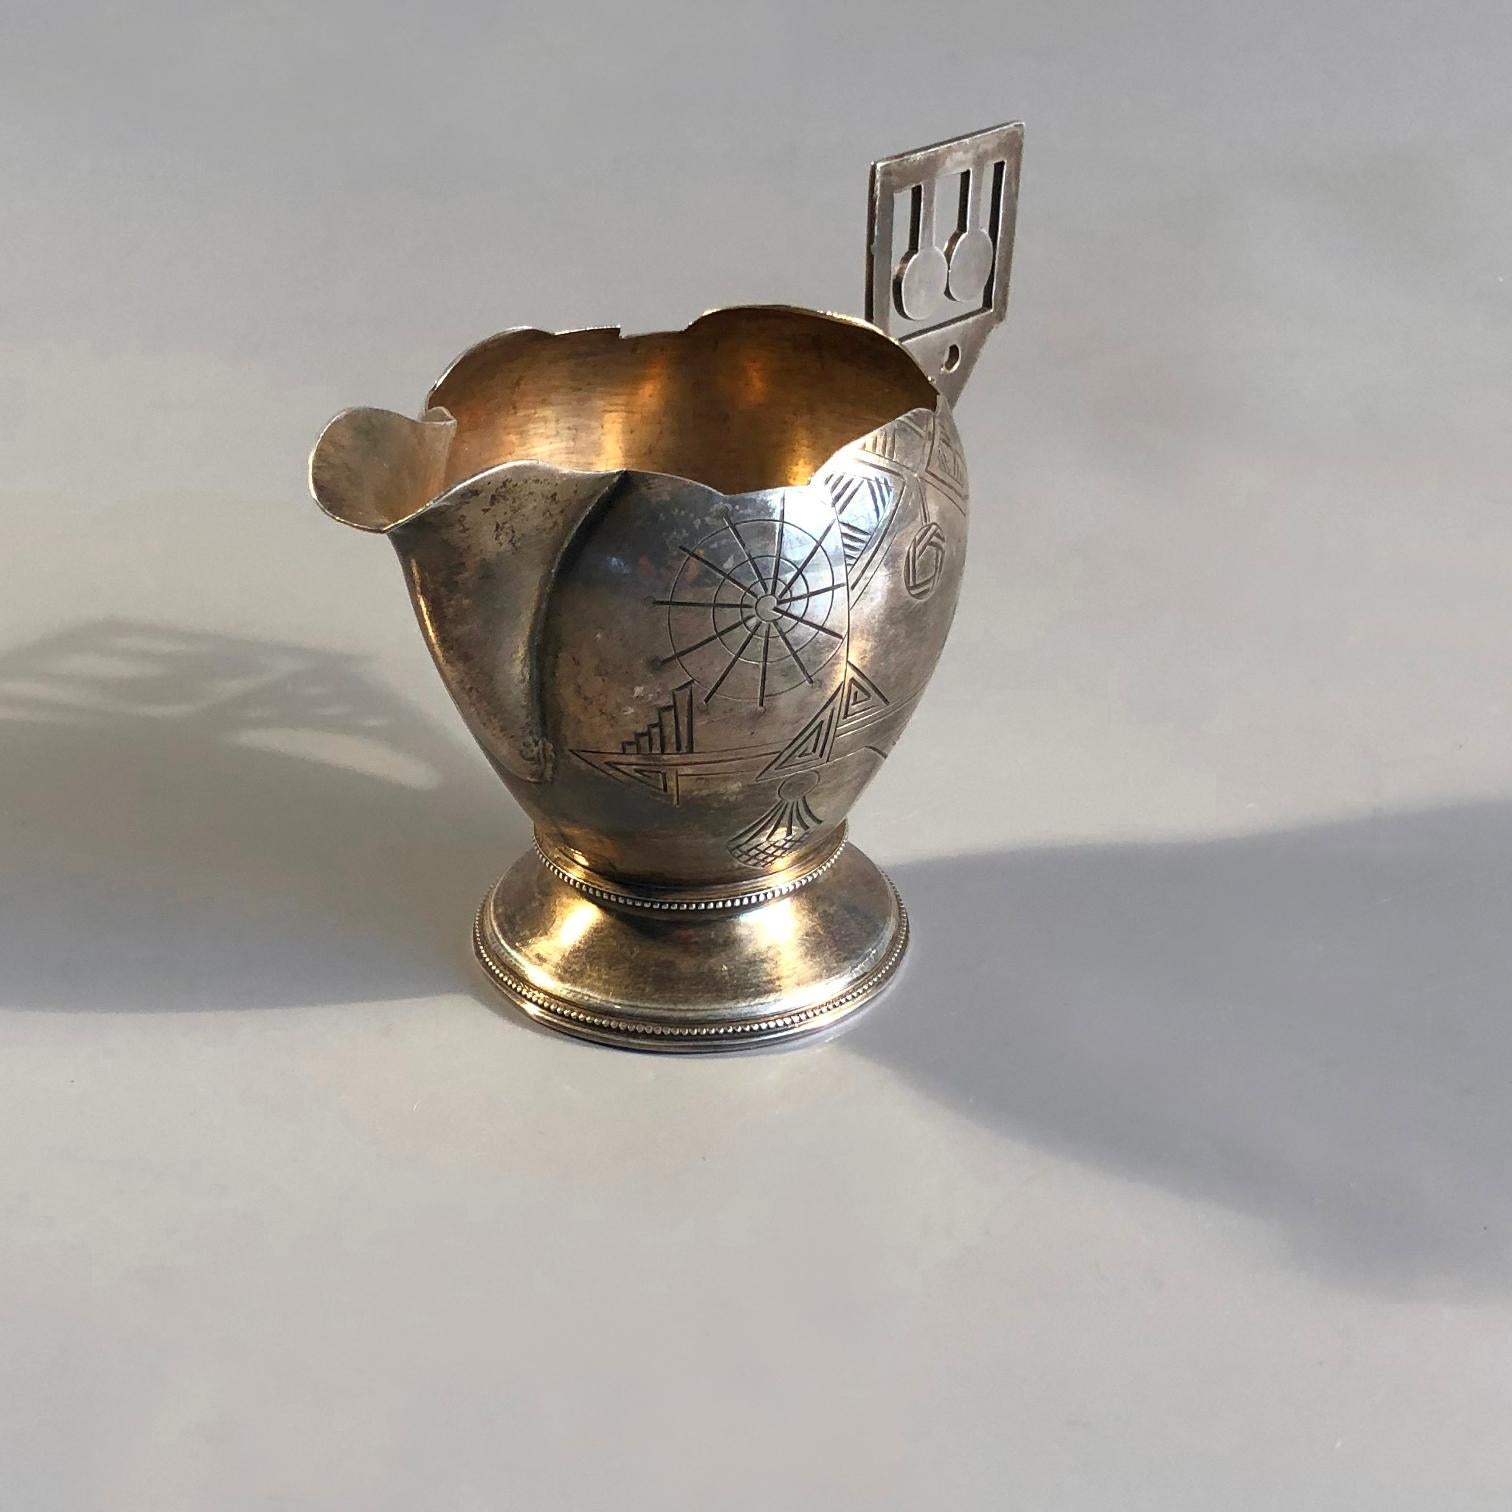 Antique Imperial 84 Silver Engraved Creamer by Antip Kuzmichev, Russia, 1900s For Sale 1